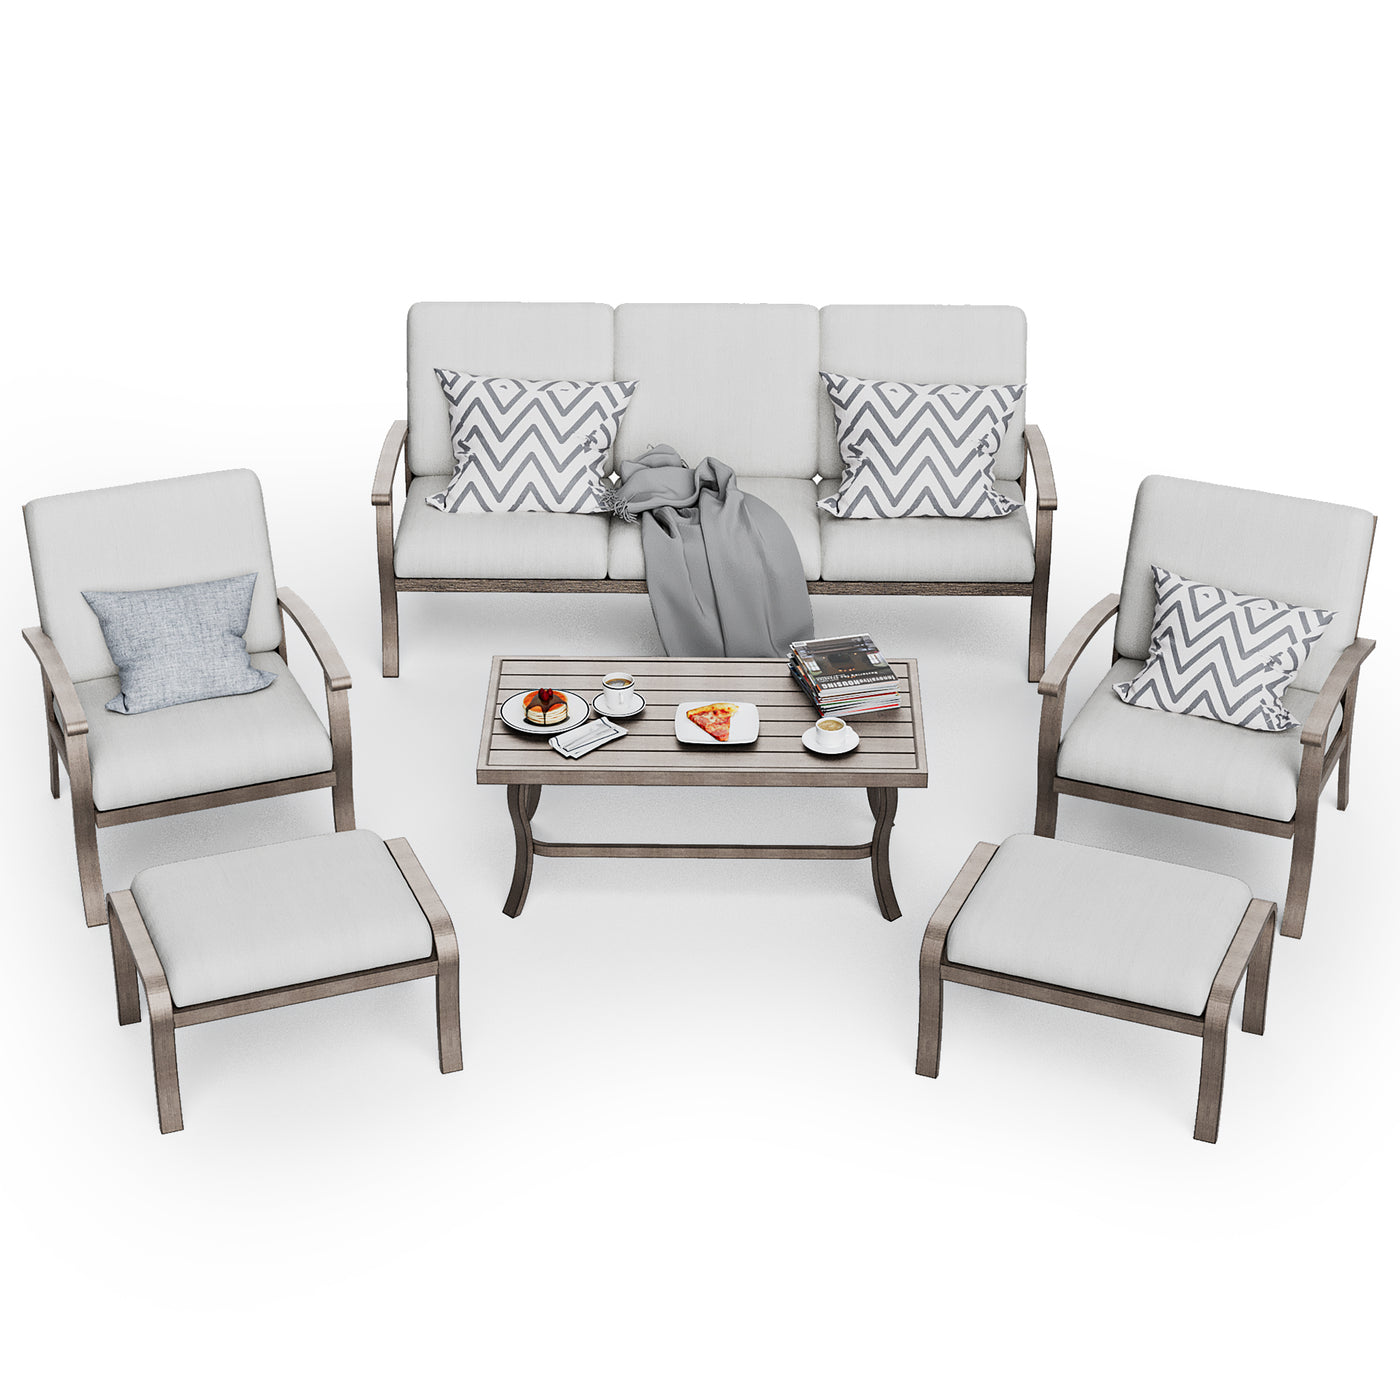 HAPPATIO 6 Piece Aluminum Patio Furniture Set, Outdoor Armchairs with Ottomans and Loveseat, Outdoor Sectional Sofa with Comfortable Cushions and Coffee Table(Gray)